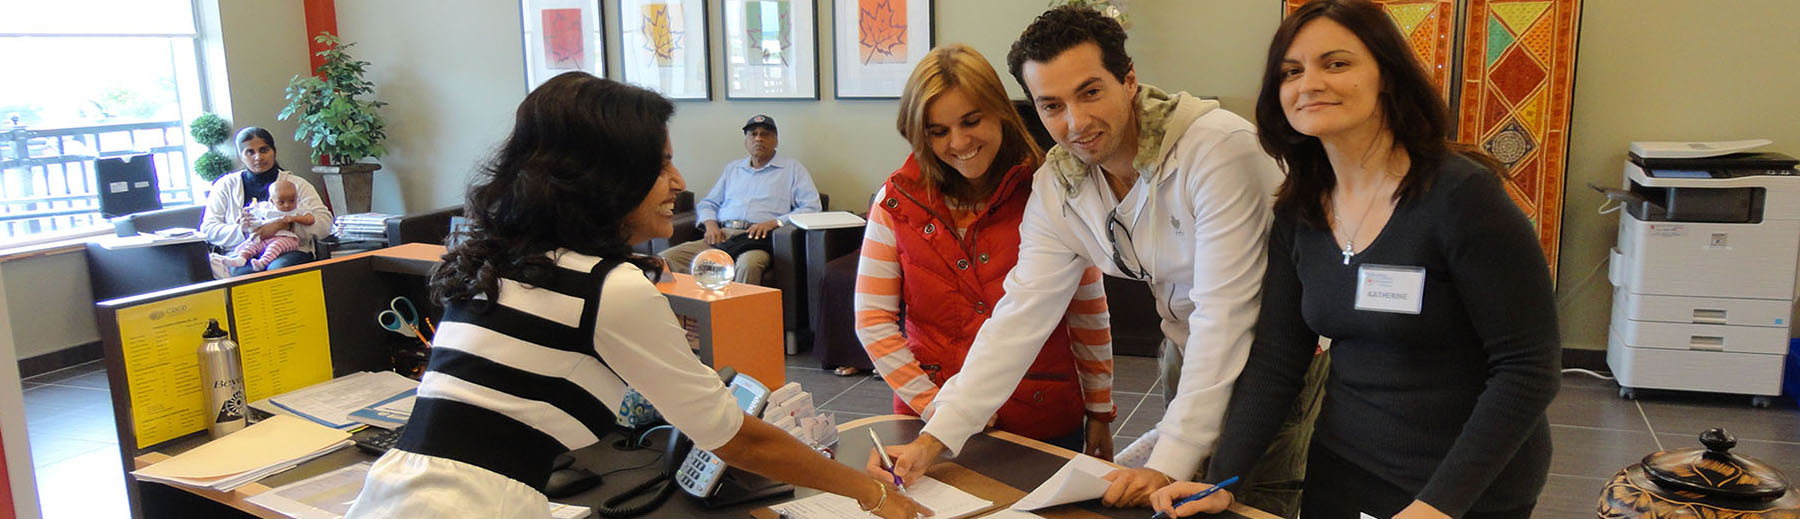 Newcomers register at the reception desk at the Ajax Welcome Centre